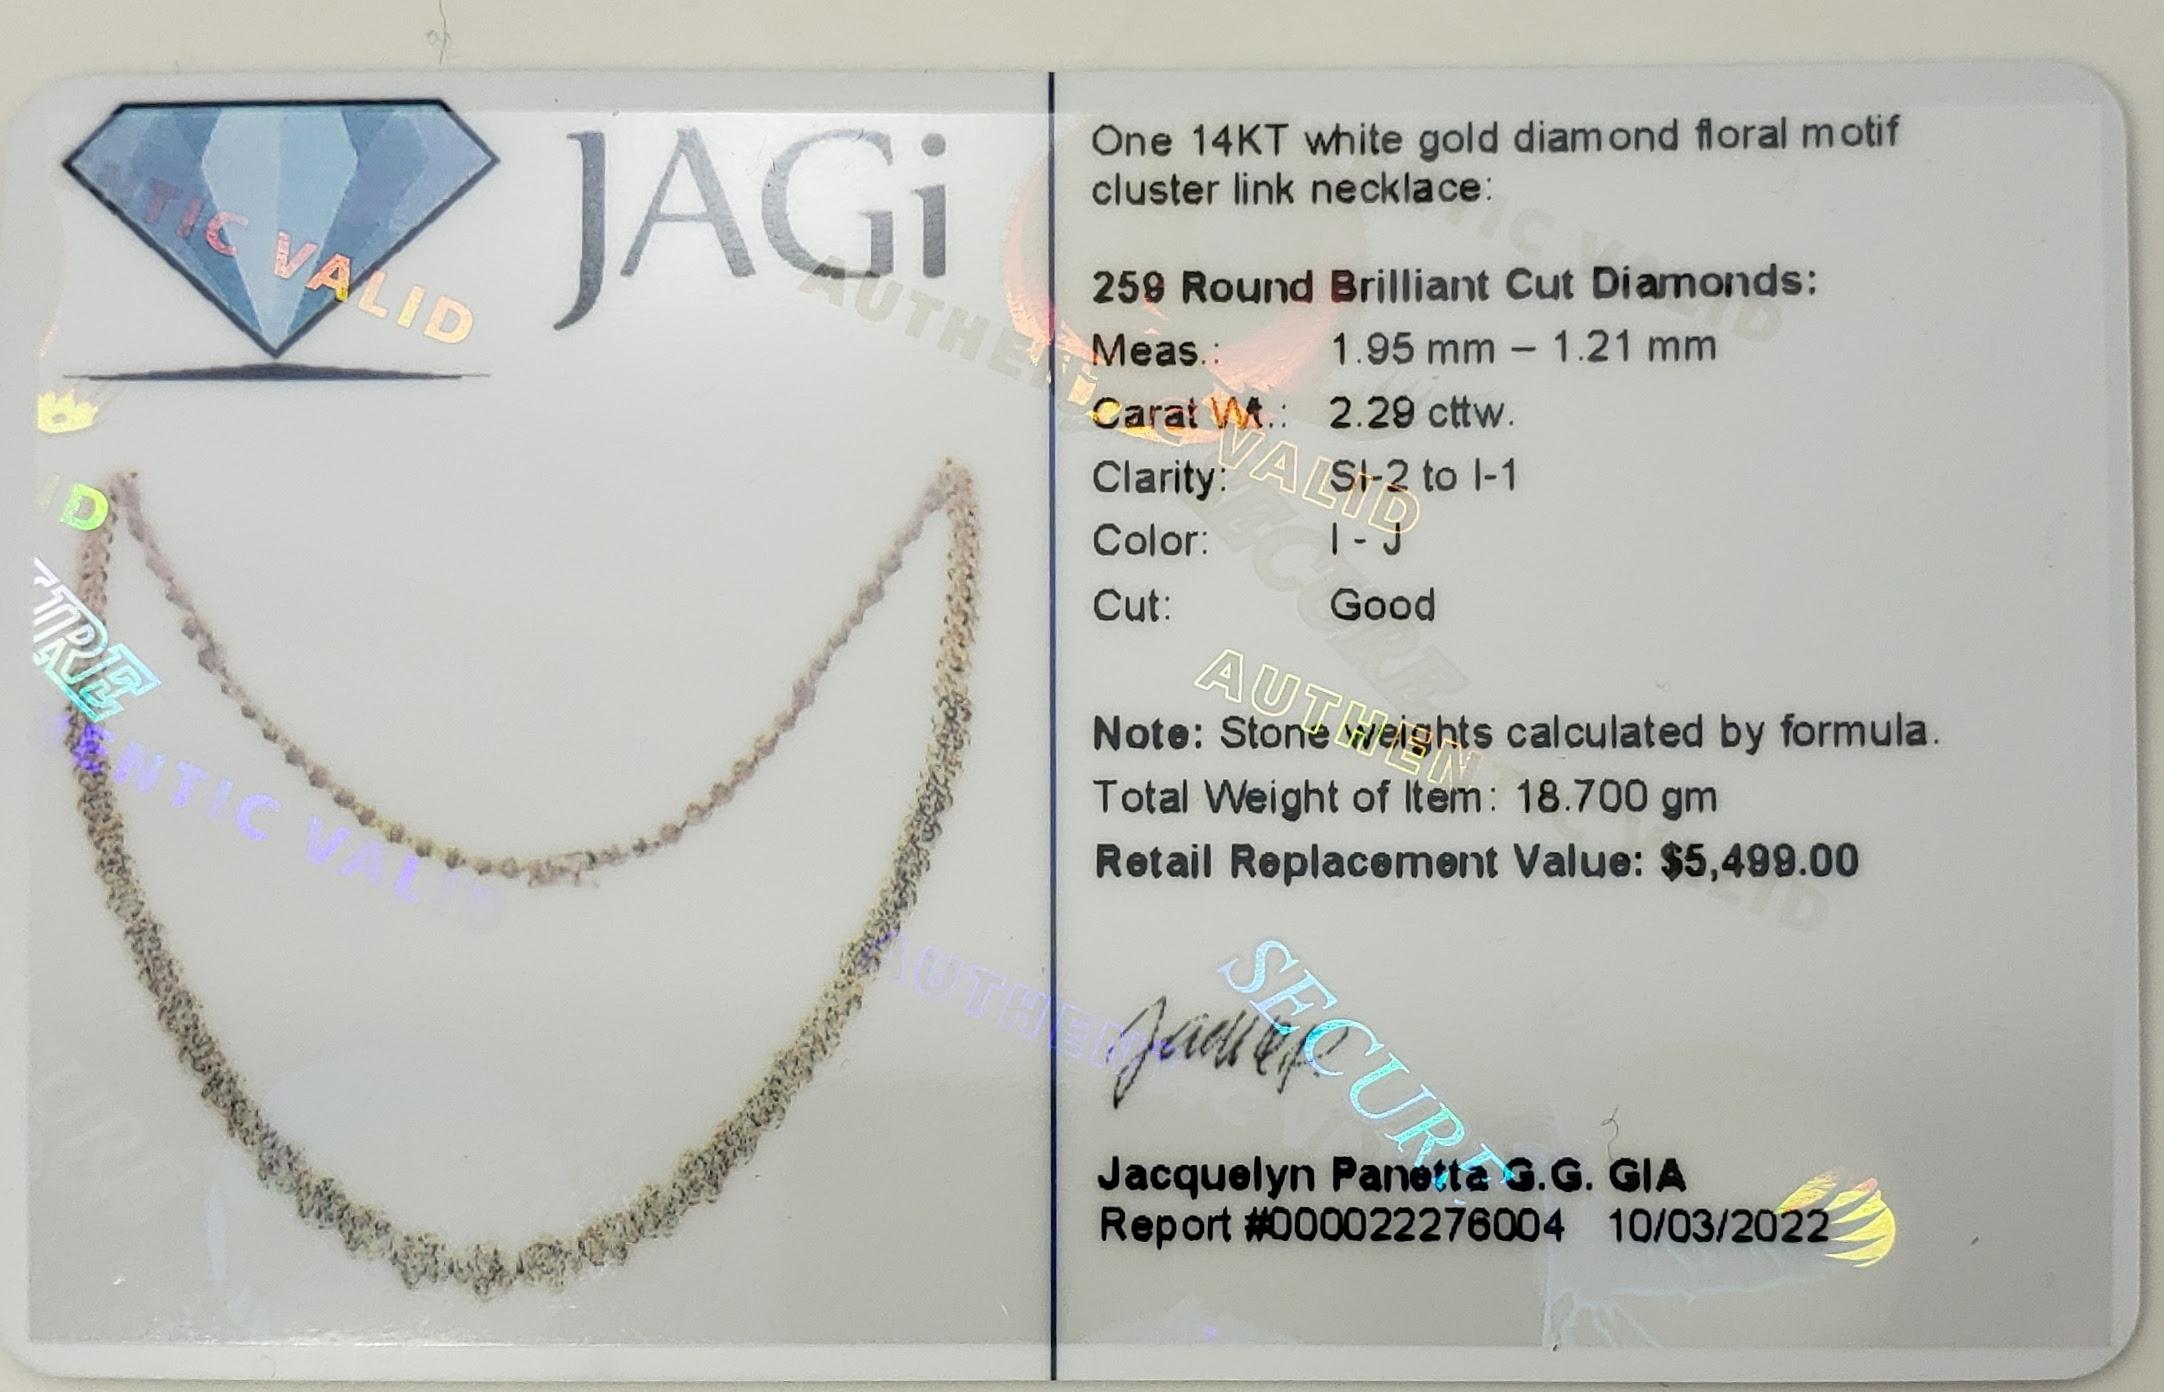 Vintage 14 Karat White Gold Diamond Flower Necklace JAGi Certified-

This sparkling necklace features 259 round brilliant cut diamonds set in beautifully detailed 14K white gold. Width: 6 mm.

Approximate total diamond weight: 2.29 ct.

Diamond